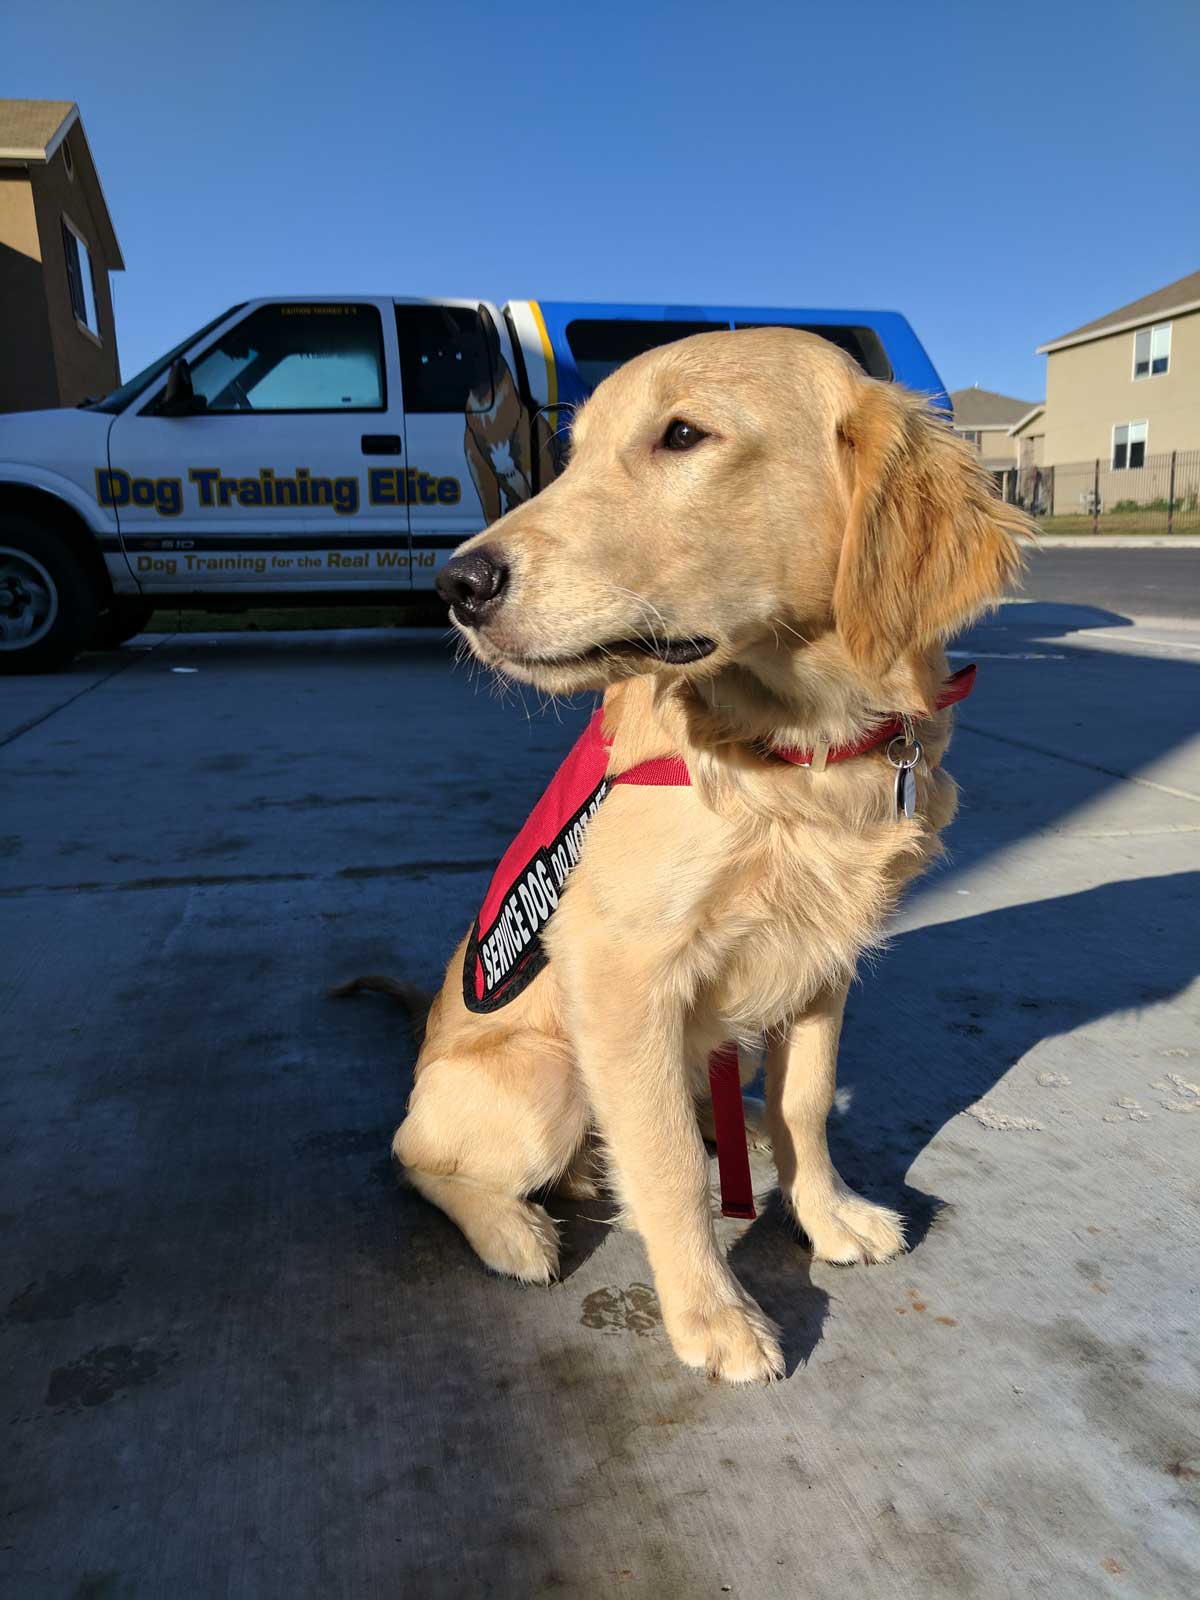 Dog Training Elite in Scottsdale is proud to have the highest rated service dog training programs near you in Scottsdale.